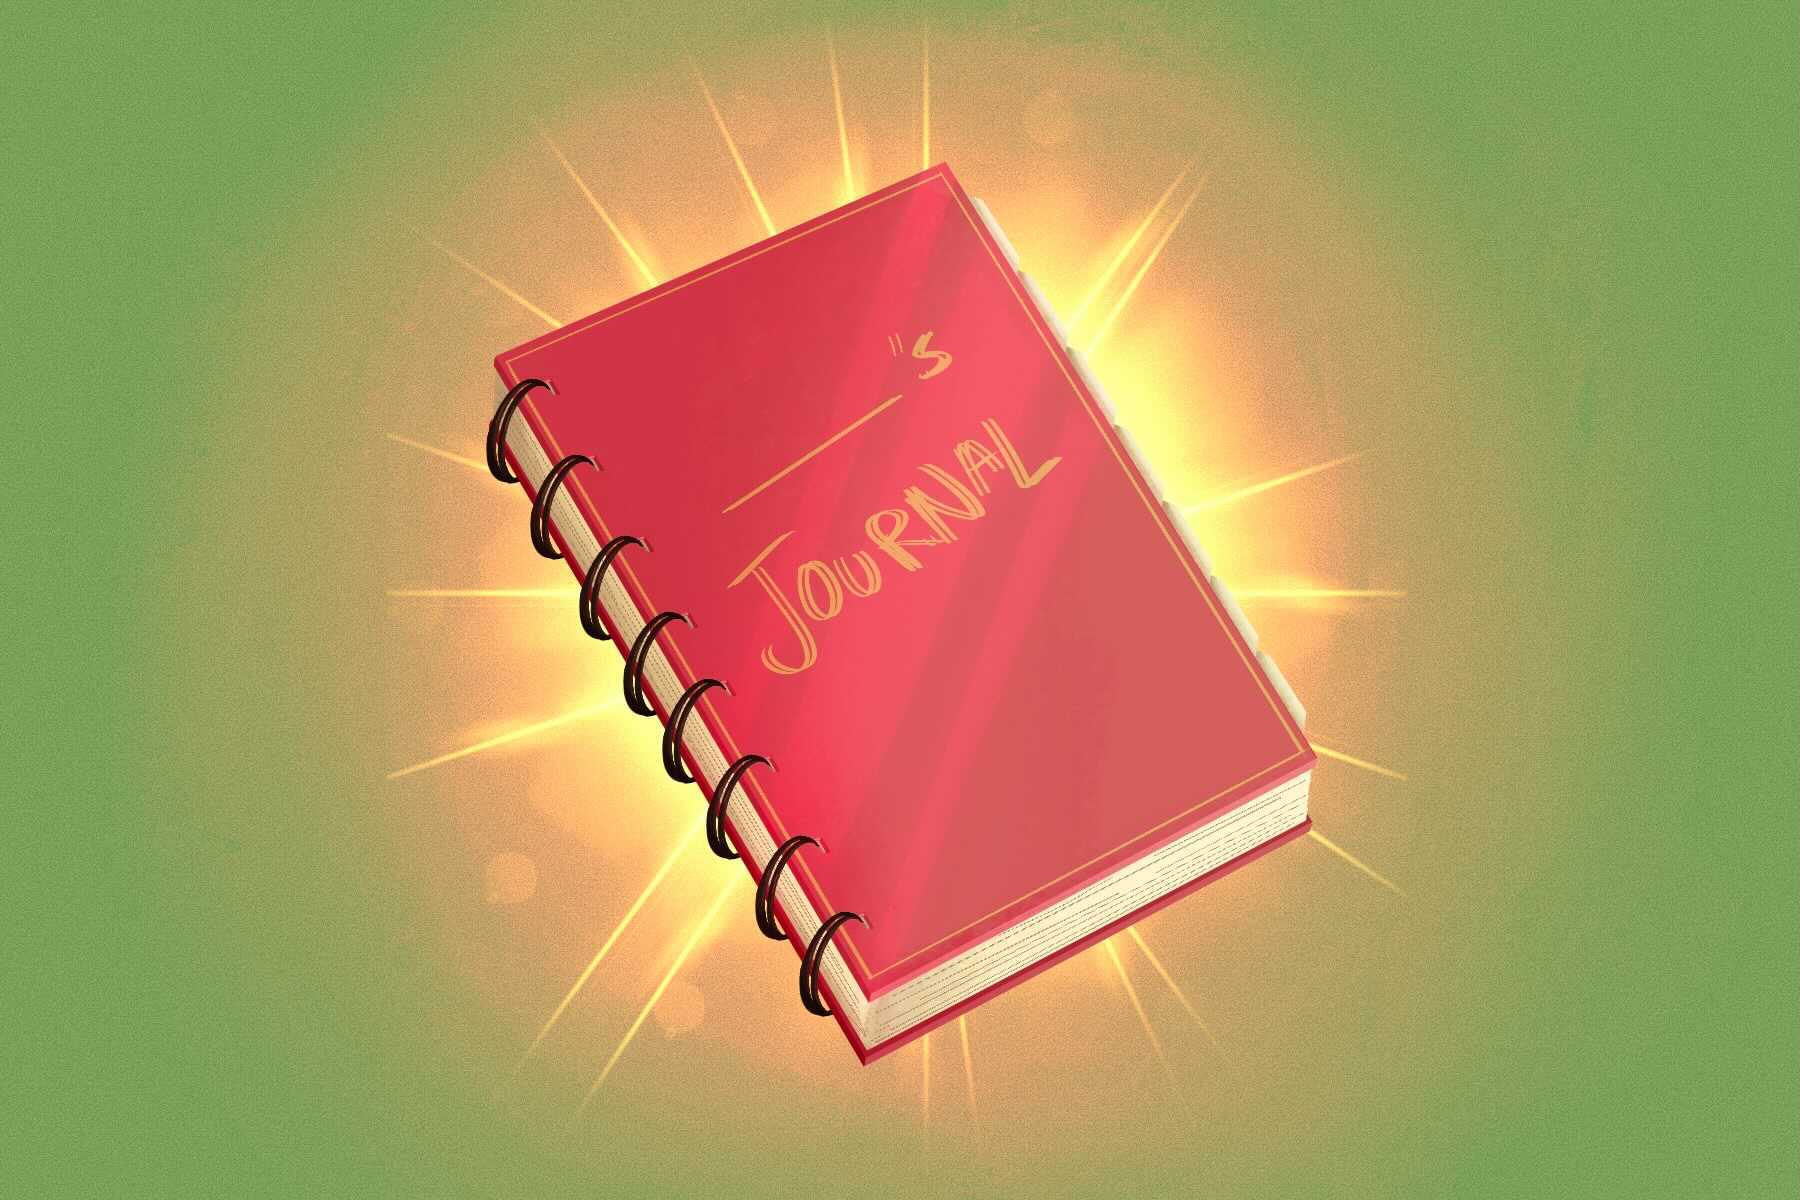 An illustration of a red journal.